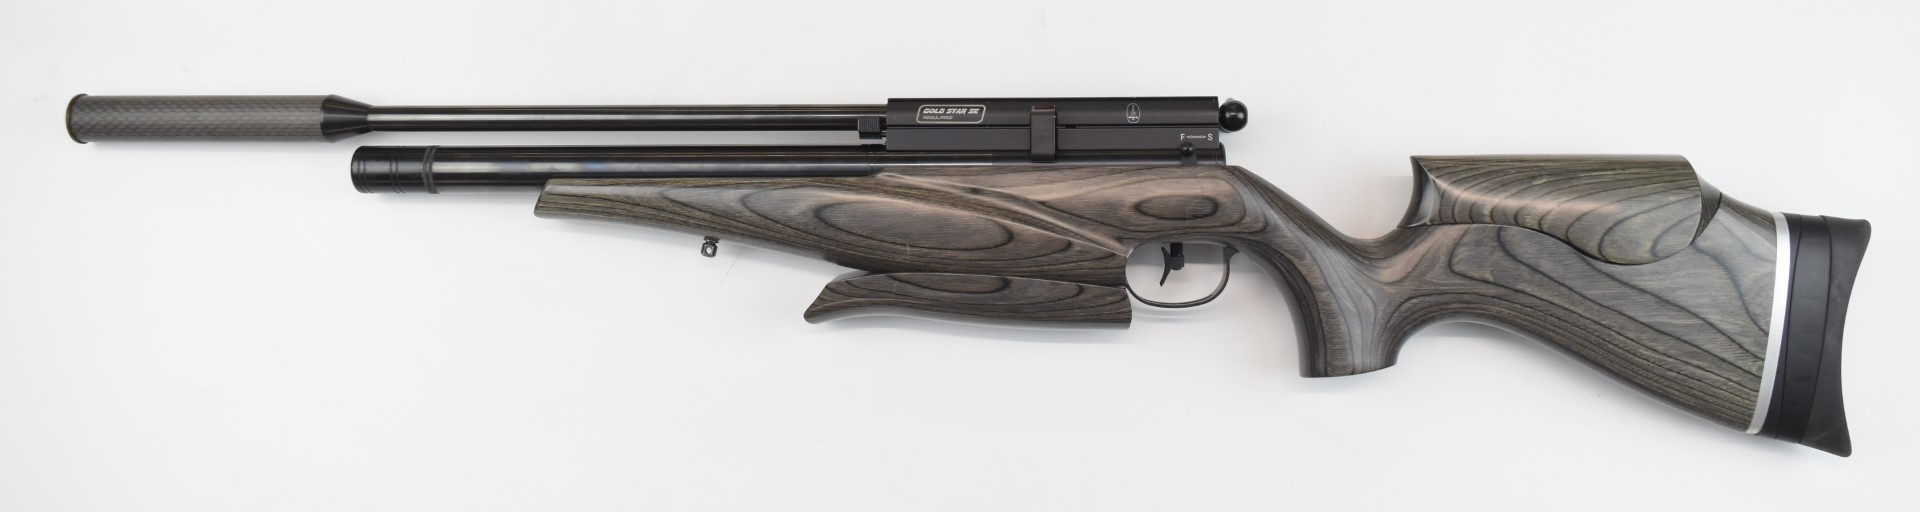 BSA Gold Star SE Regulated .177 PCP air rifle with show wood stock, semi-pistol grip, adjustable - Image 14 of 20